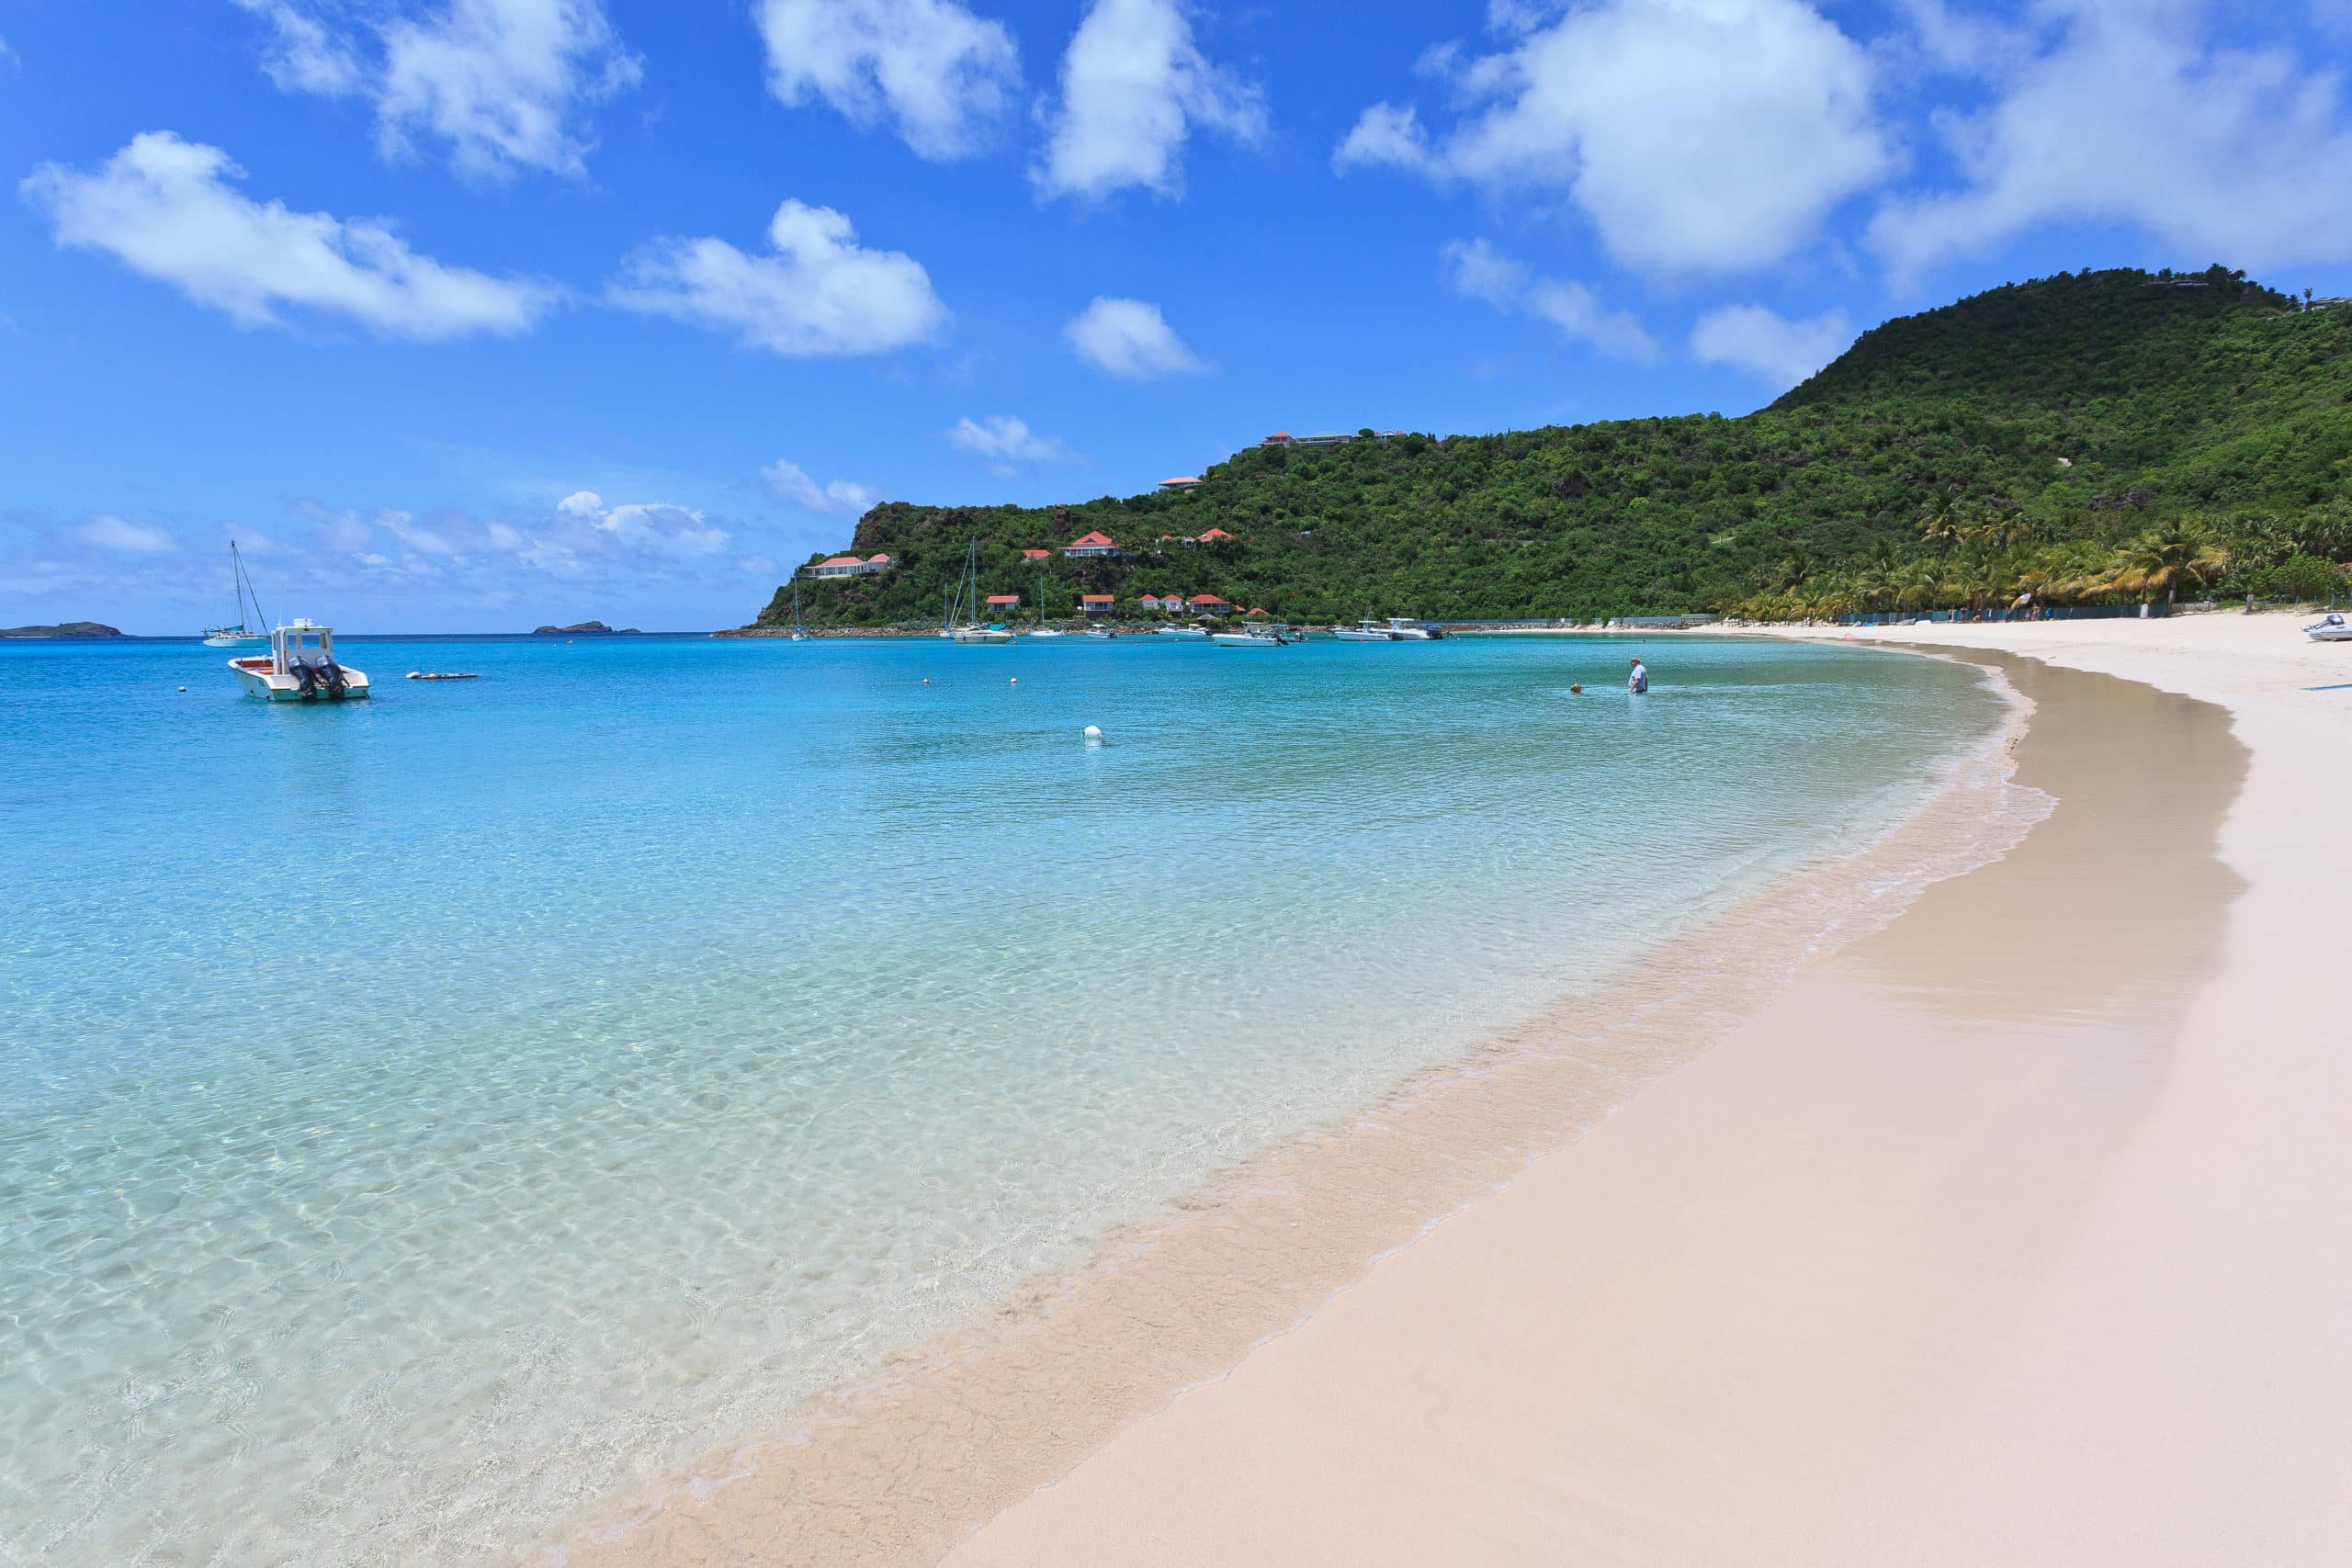 Guide to St. Barts Island Know Before You Go to St Bart's